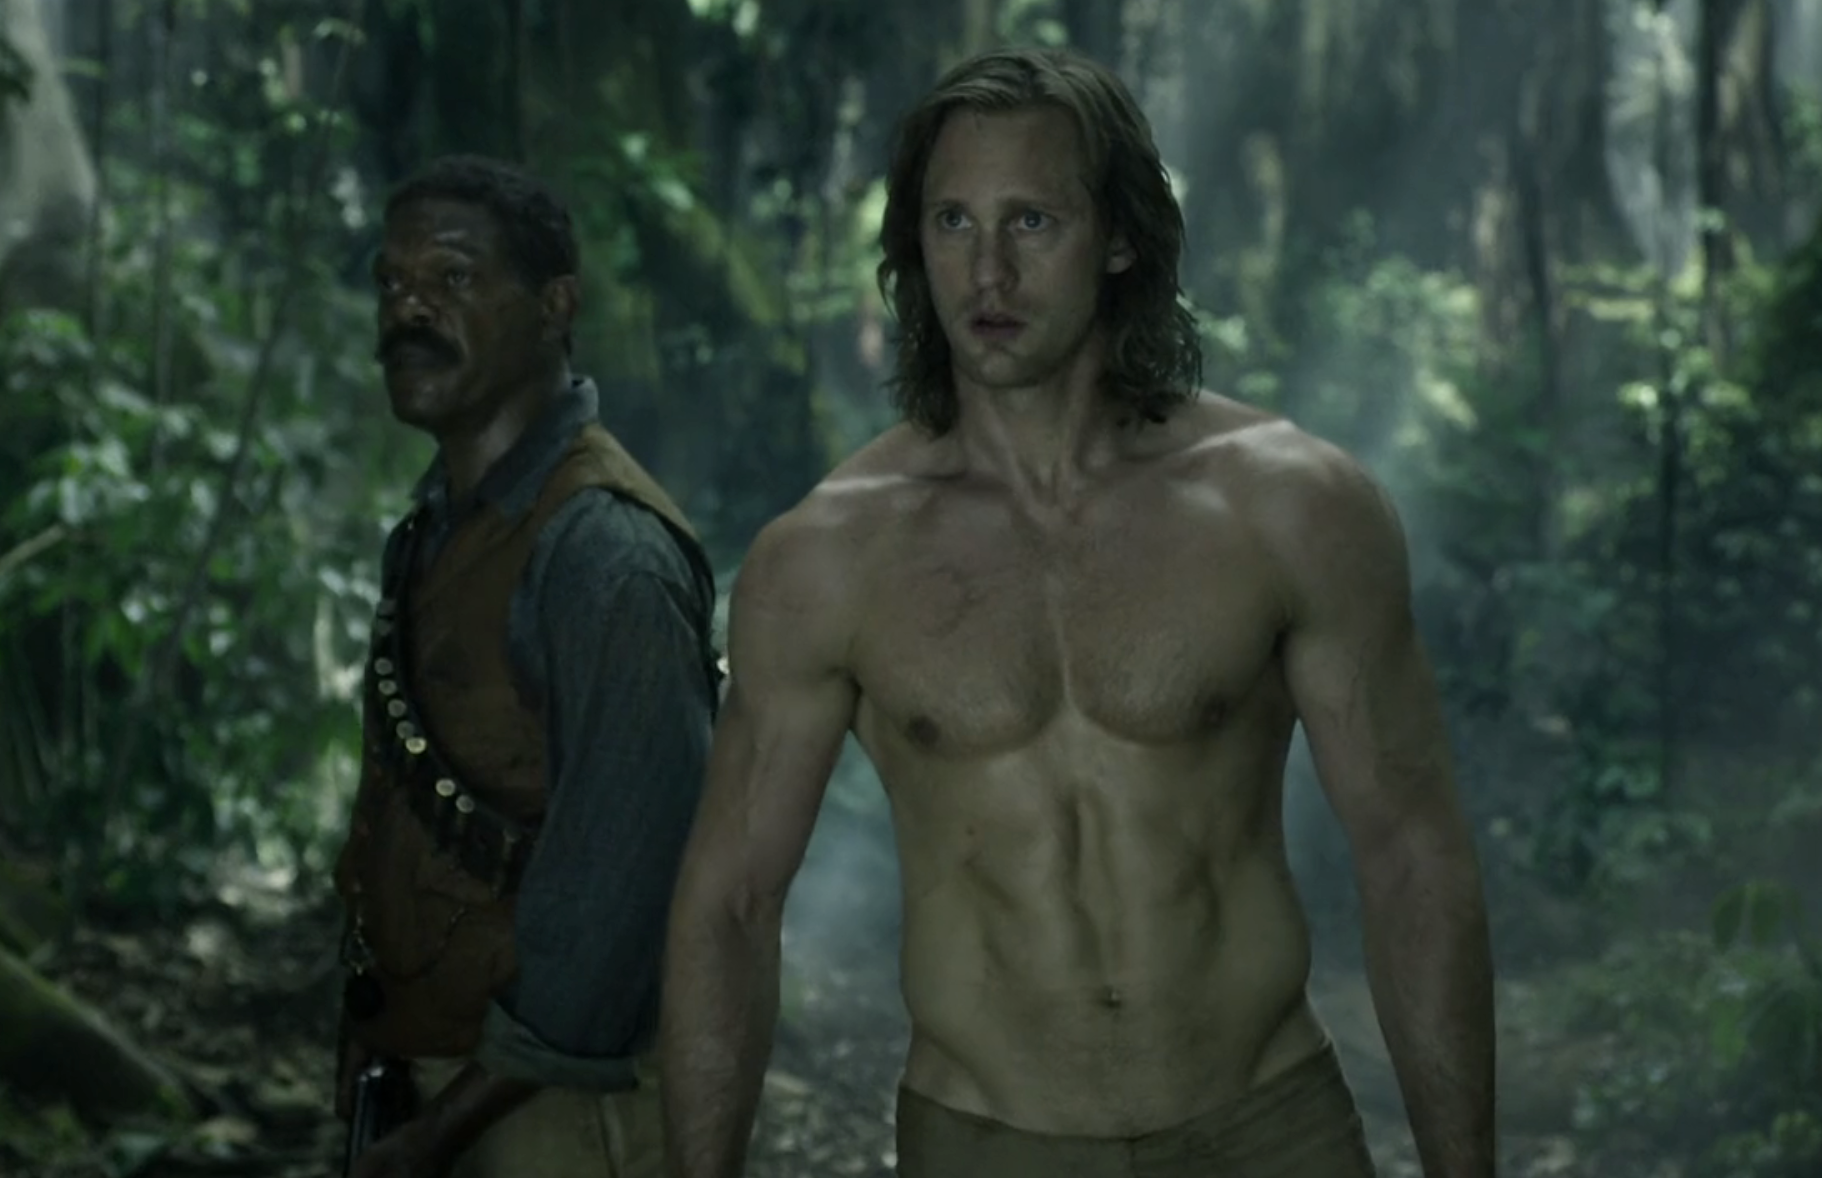 Alexander shirtless in the jungle, standing next to Samuel L. Jackson&#x27;s character